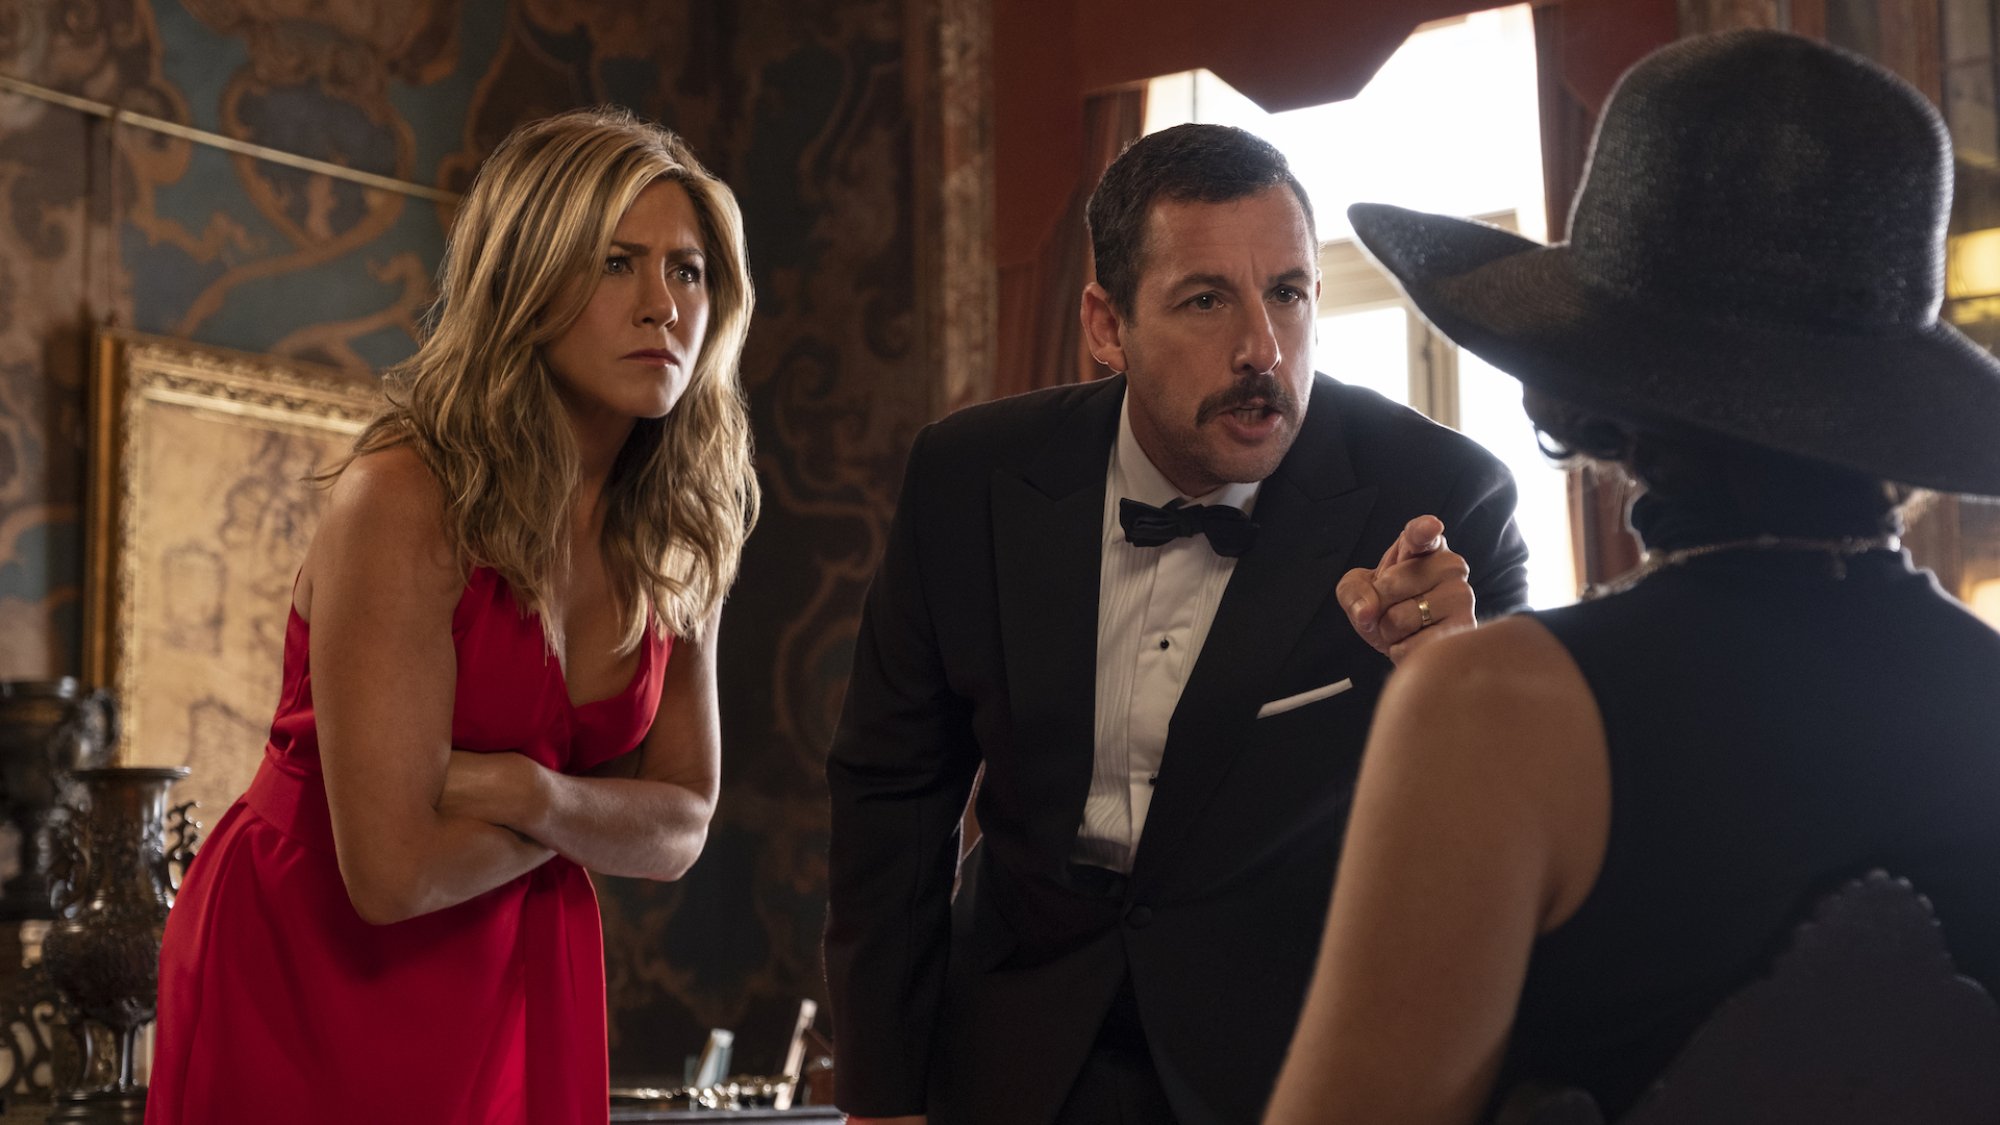 Jennifer Aniston and Adam Sandler point accusatory fingers at a seated Gemma Arterton in the film "Murder Mystery"